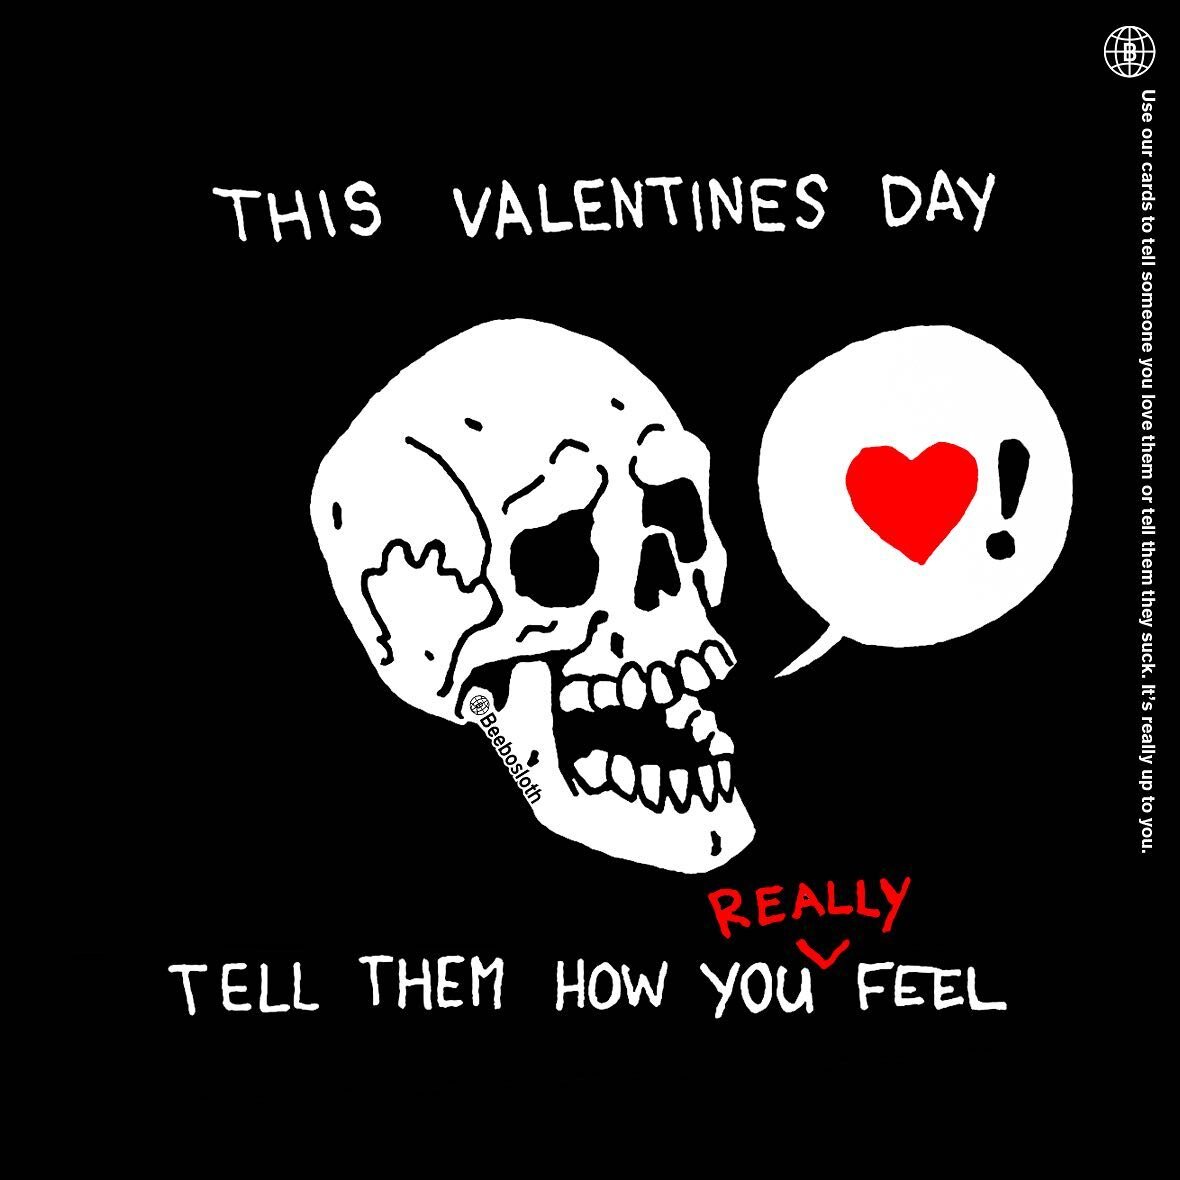 *read the fine print
.
.
.
#beebosloth #vday #valentines #skull #badtattoo #crookedteeth #heart #heartdrawing #shouting #doodle